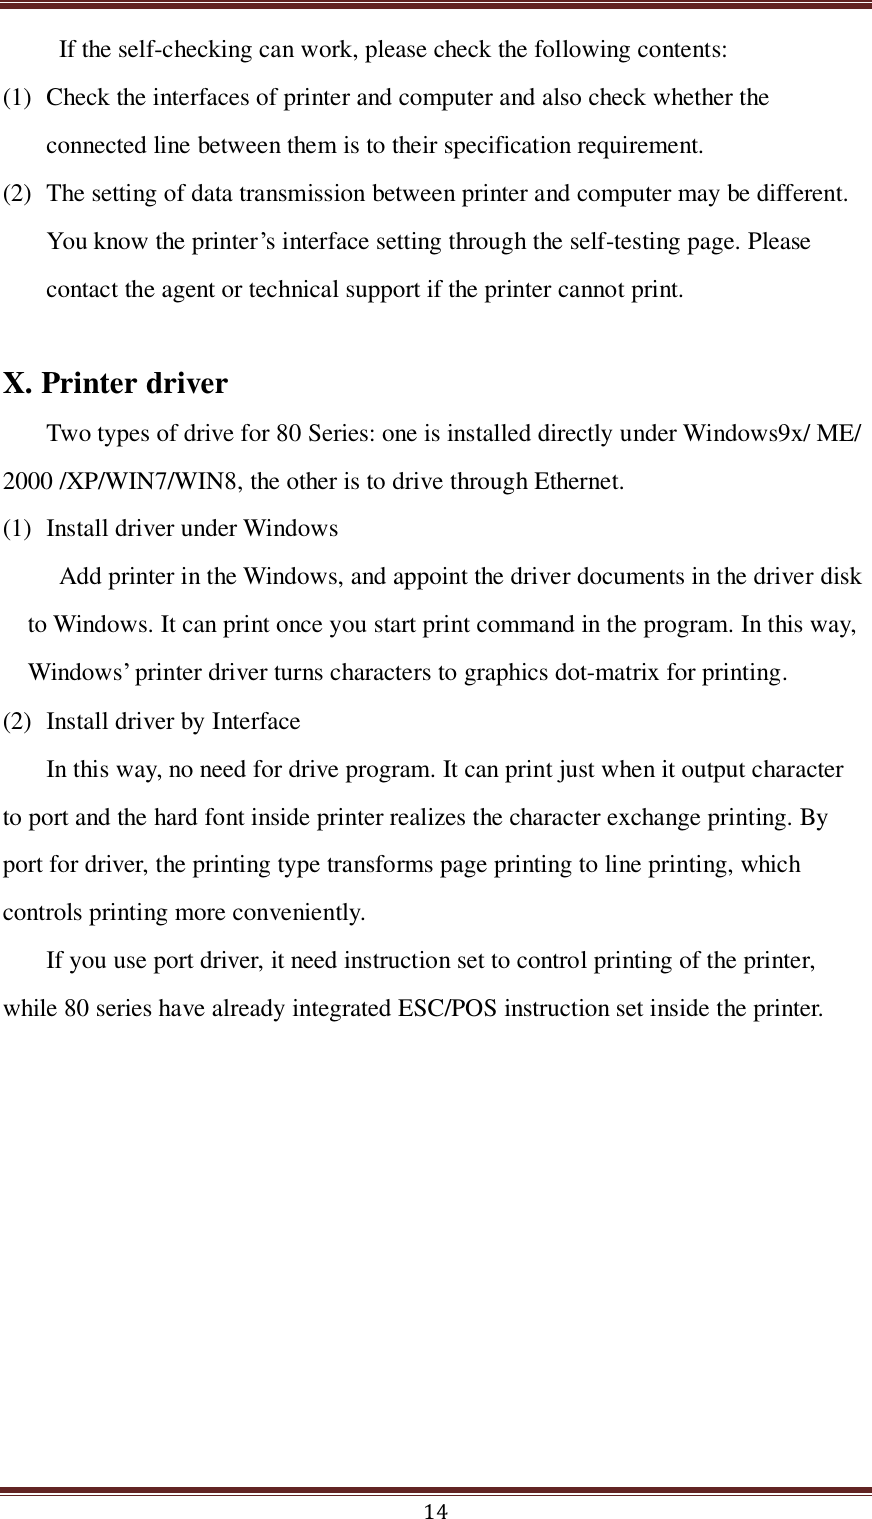  14 If the self-checking can work, please check the following contents: (1) Check the interfaces of printer and computer and also check whether the connected line between them is to their specification requirement.   (2) The setting of data transmission between printer and computer may be different. You know the printer’s interface setting through the self-testing page. Please contact the agent or technical support if the printer cannot print.  X. Printer driver Two types of drive for 80 Series: one is installed directly under Windows9x/ ME/ 2000 /XP/WIN7/WIN8, the other is to drive through Ethernet. (1) Install driver under Windows Add printer in the Windows, and appoint the driver documents in the driver disk to Windows. It can print once you start print command in the program. In this way, Windows’ printer driver turns characters to graphics dot-matrix for printing.   (2) Install driver by Interface In this way, no need for drive program. It can print just when it output character to port and the hard font inside printer realizes the character exchange printing. By port for driver, the printing type transforms page printing to line printing, which controls printing more conveniently. If you use port driver, it need instruction set to control printing of the printer, while 80 series have already integrated ESC/POS instruction set inside the printer. 